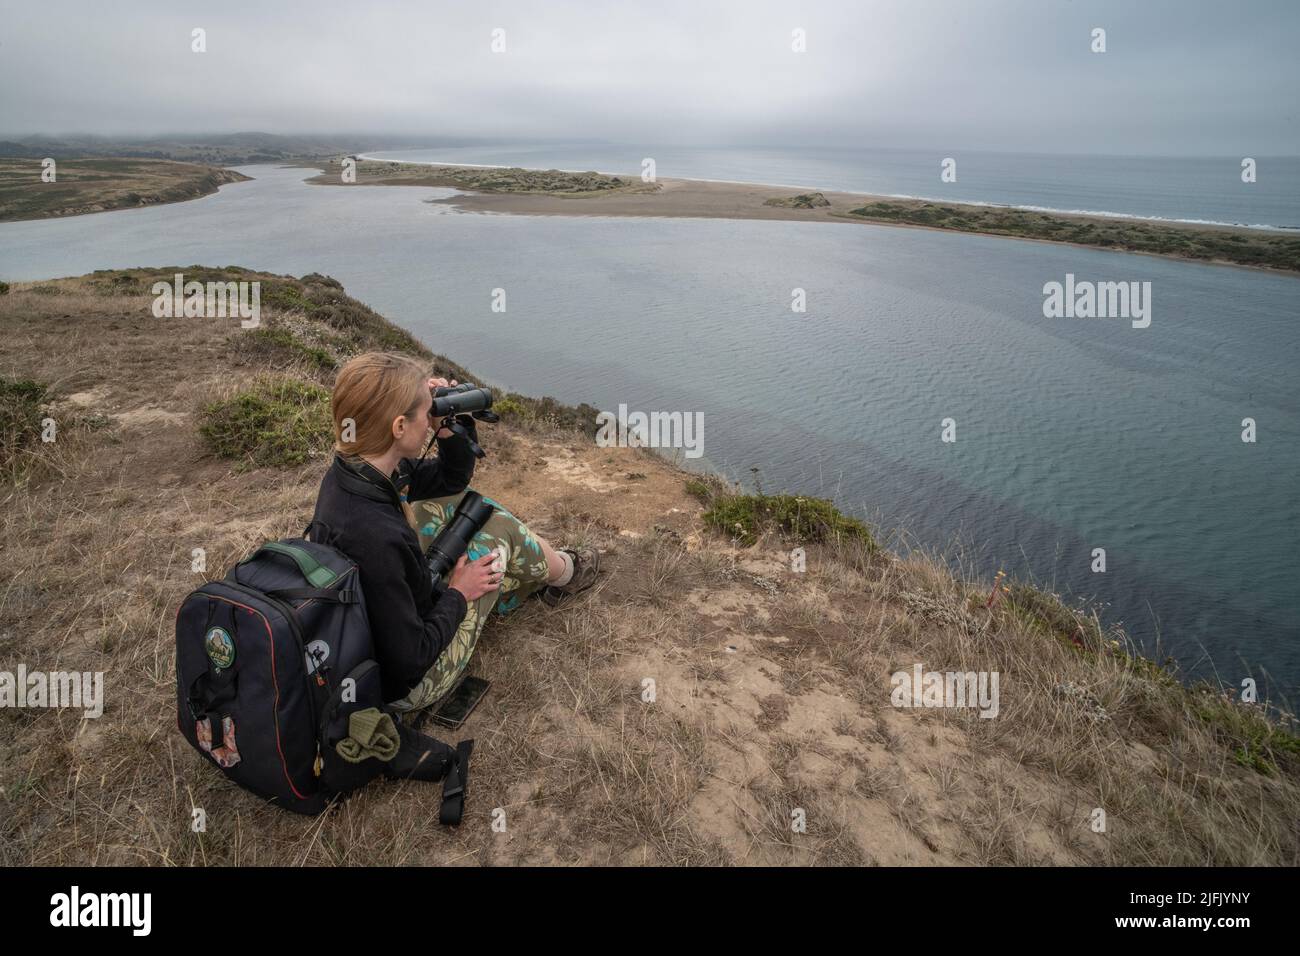 A bird watcher sits on coastal cliffs looking through binoculars scanning the coast of the Pacific ocean at point reyes National seashore in CA. Stock Photo